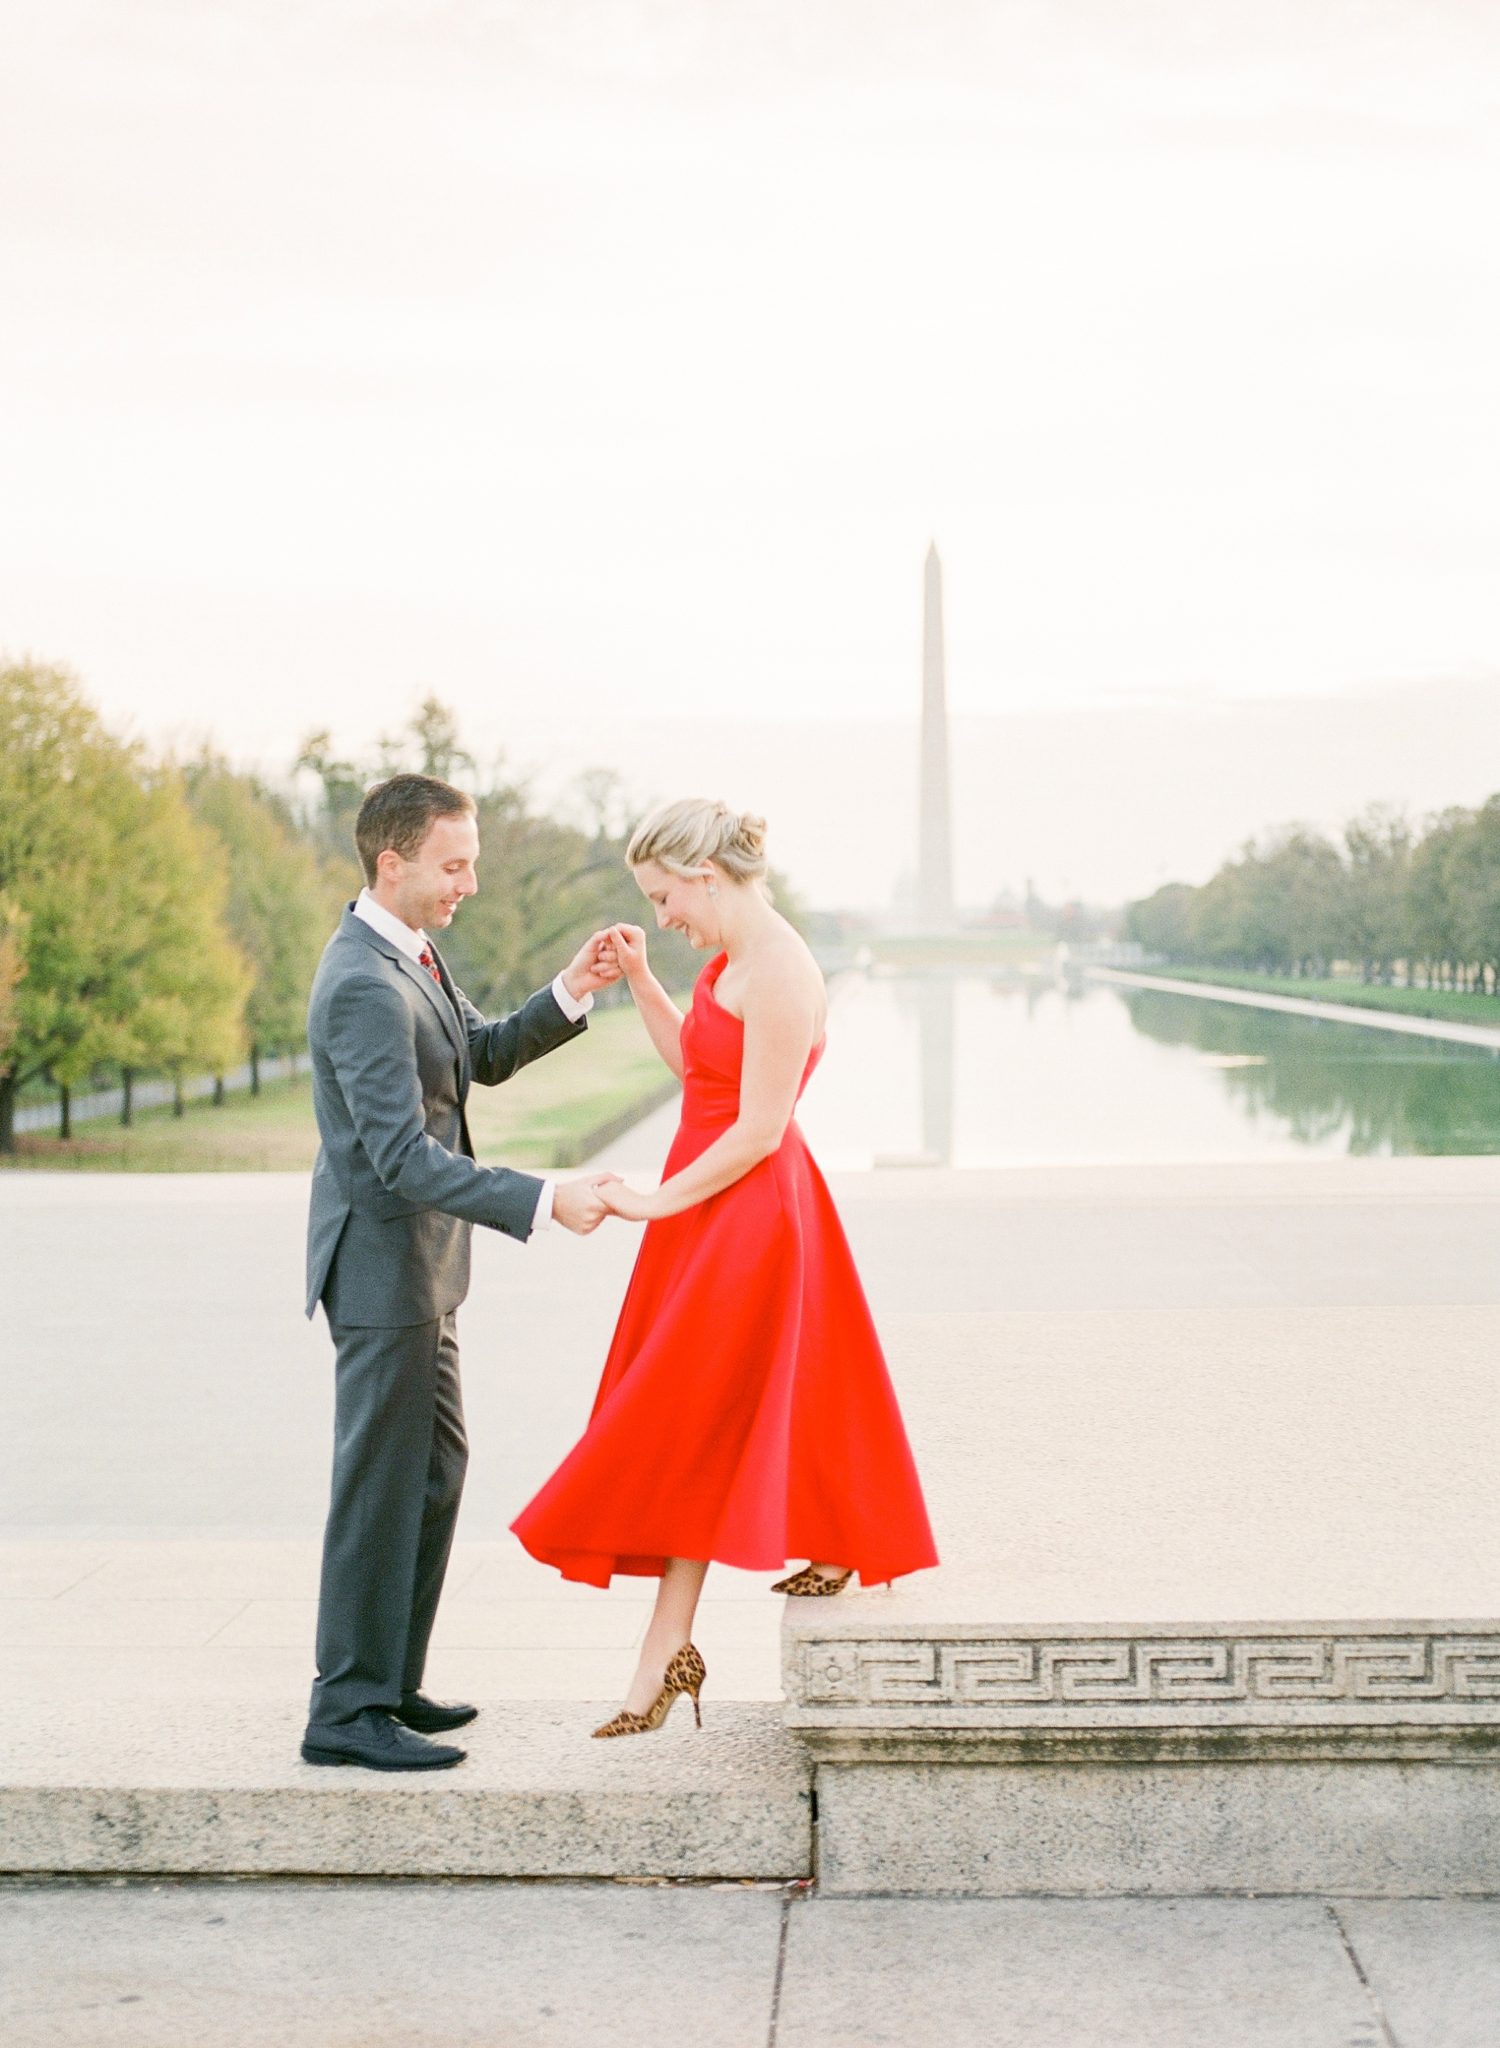 A holiday inspired engagement session at the iconic monuments of Washington, DC